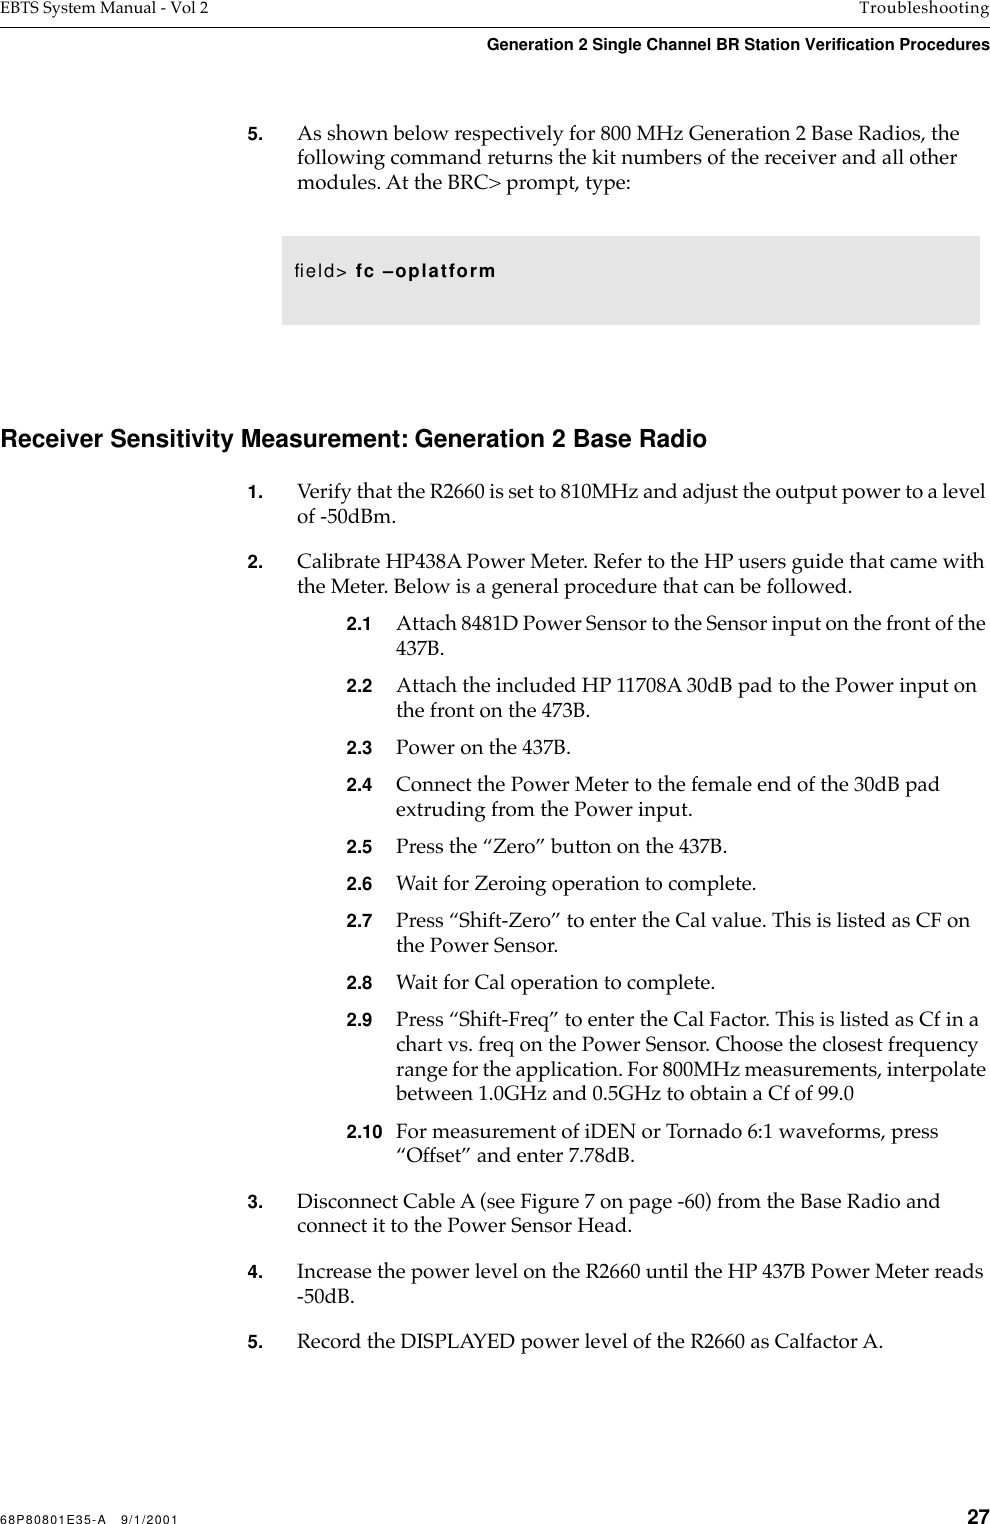 68P80801E35-A   9/1/2001 27EBTS System Manual - Vol 2 TroubleshootingGeneration 2 Single Channel BR Station Verification Procedures 5. As shown below respectively for 800 MHz Generation 2 Base Radios, the following command returns the kit numbers of the receiver and all other modules. At the BRC&gt; prompt, type: Receiver Sensitivity Measurement: Generation 2 Base Radio1. Verify that the R2660 is set to 810MHz and adjust the output power to a level of -50dBm.2. Calibrate HP438A Power Meter. Refer to the HP users guide that came with the Meter. Below is a general procedure that can be followed.2.1 Attach 8481D Power Sensor to the Sensor input on the front of the 437B. 2.2 Attach the included HP 11708A 30dB pad to the Power input on the front on the 473B.2.3 Power on the 437B.2.4 Connect the Power Meter to the female end of the 30dB pad extruding from the Power input.2.5 Press the “Zero” button on the 437B.2.6 Wait for Zeroing operation to complete.2.7 Press “Shift-Zero” to enter the Cal value. This is listed as CF on the Power Sensor.2.8 Wait for Cal operation to complete.2.9 Press “Shift-Freq” to enter the Cal Factor. This is listed as Cf in a chart vs. freq on the Power Sensor. Choose the closest frequency range for the application. For 800MHz measurements, interpolate between 1.0GHz and 0.5GHz to obtain a Cf of 99.02.10 For measurement of iDEN or Tornado 6:1 waveforms, press “Offset” and enter 7.78dB.3. Disconnect Cable A (see Figure 7 on page -60) from the Base Radio and connect it to the Power Sensor Head.4. Increase the power level on the R2660 until the HP 437B Power Meter reads -50dB.5. Record the DISPLAYED power level of the R2660 as Calfactor A.ﬁeld&gt; fc –oplatform